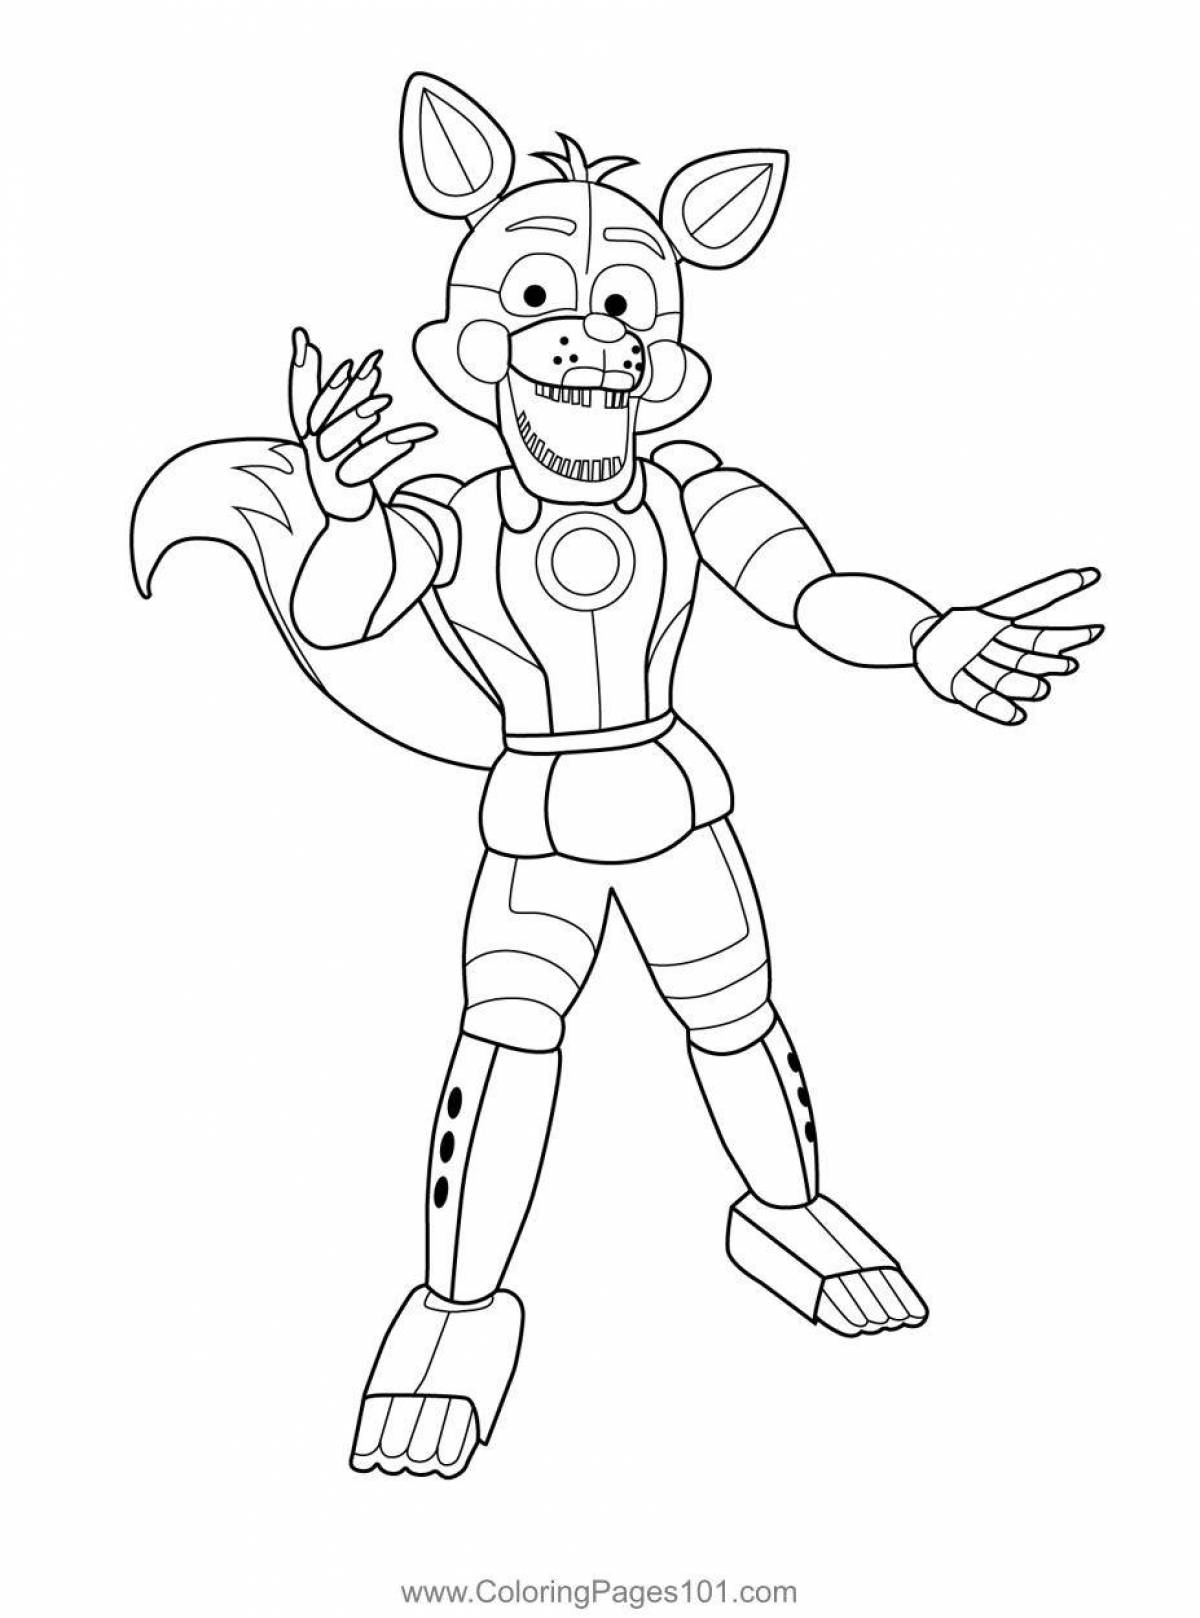 Intriguing freddy robot coloring page